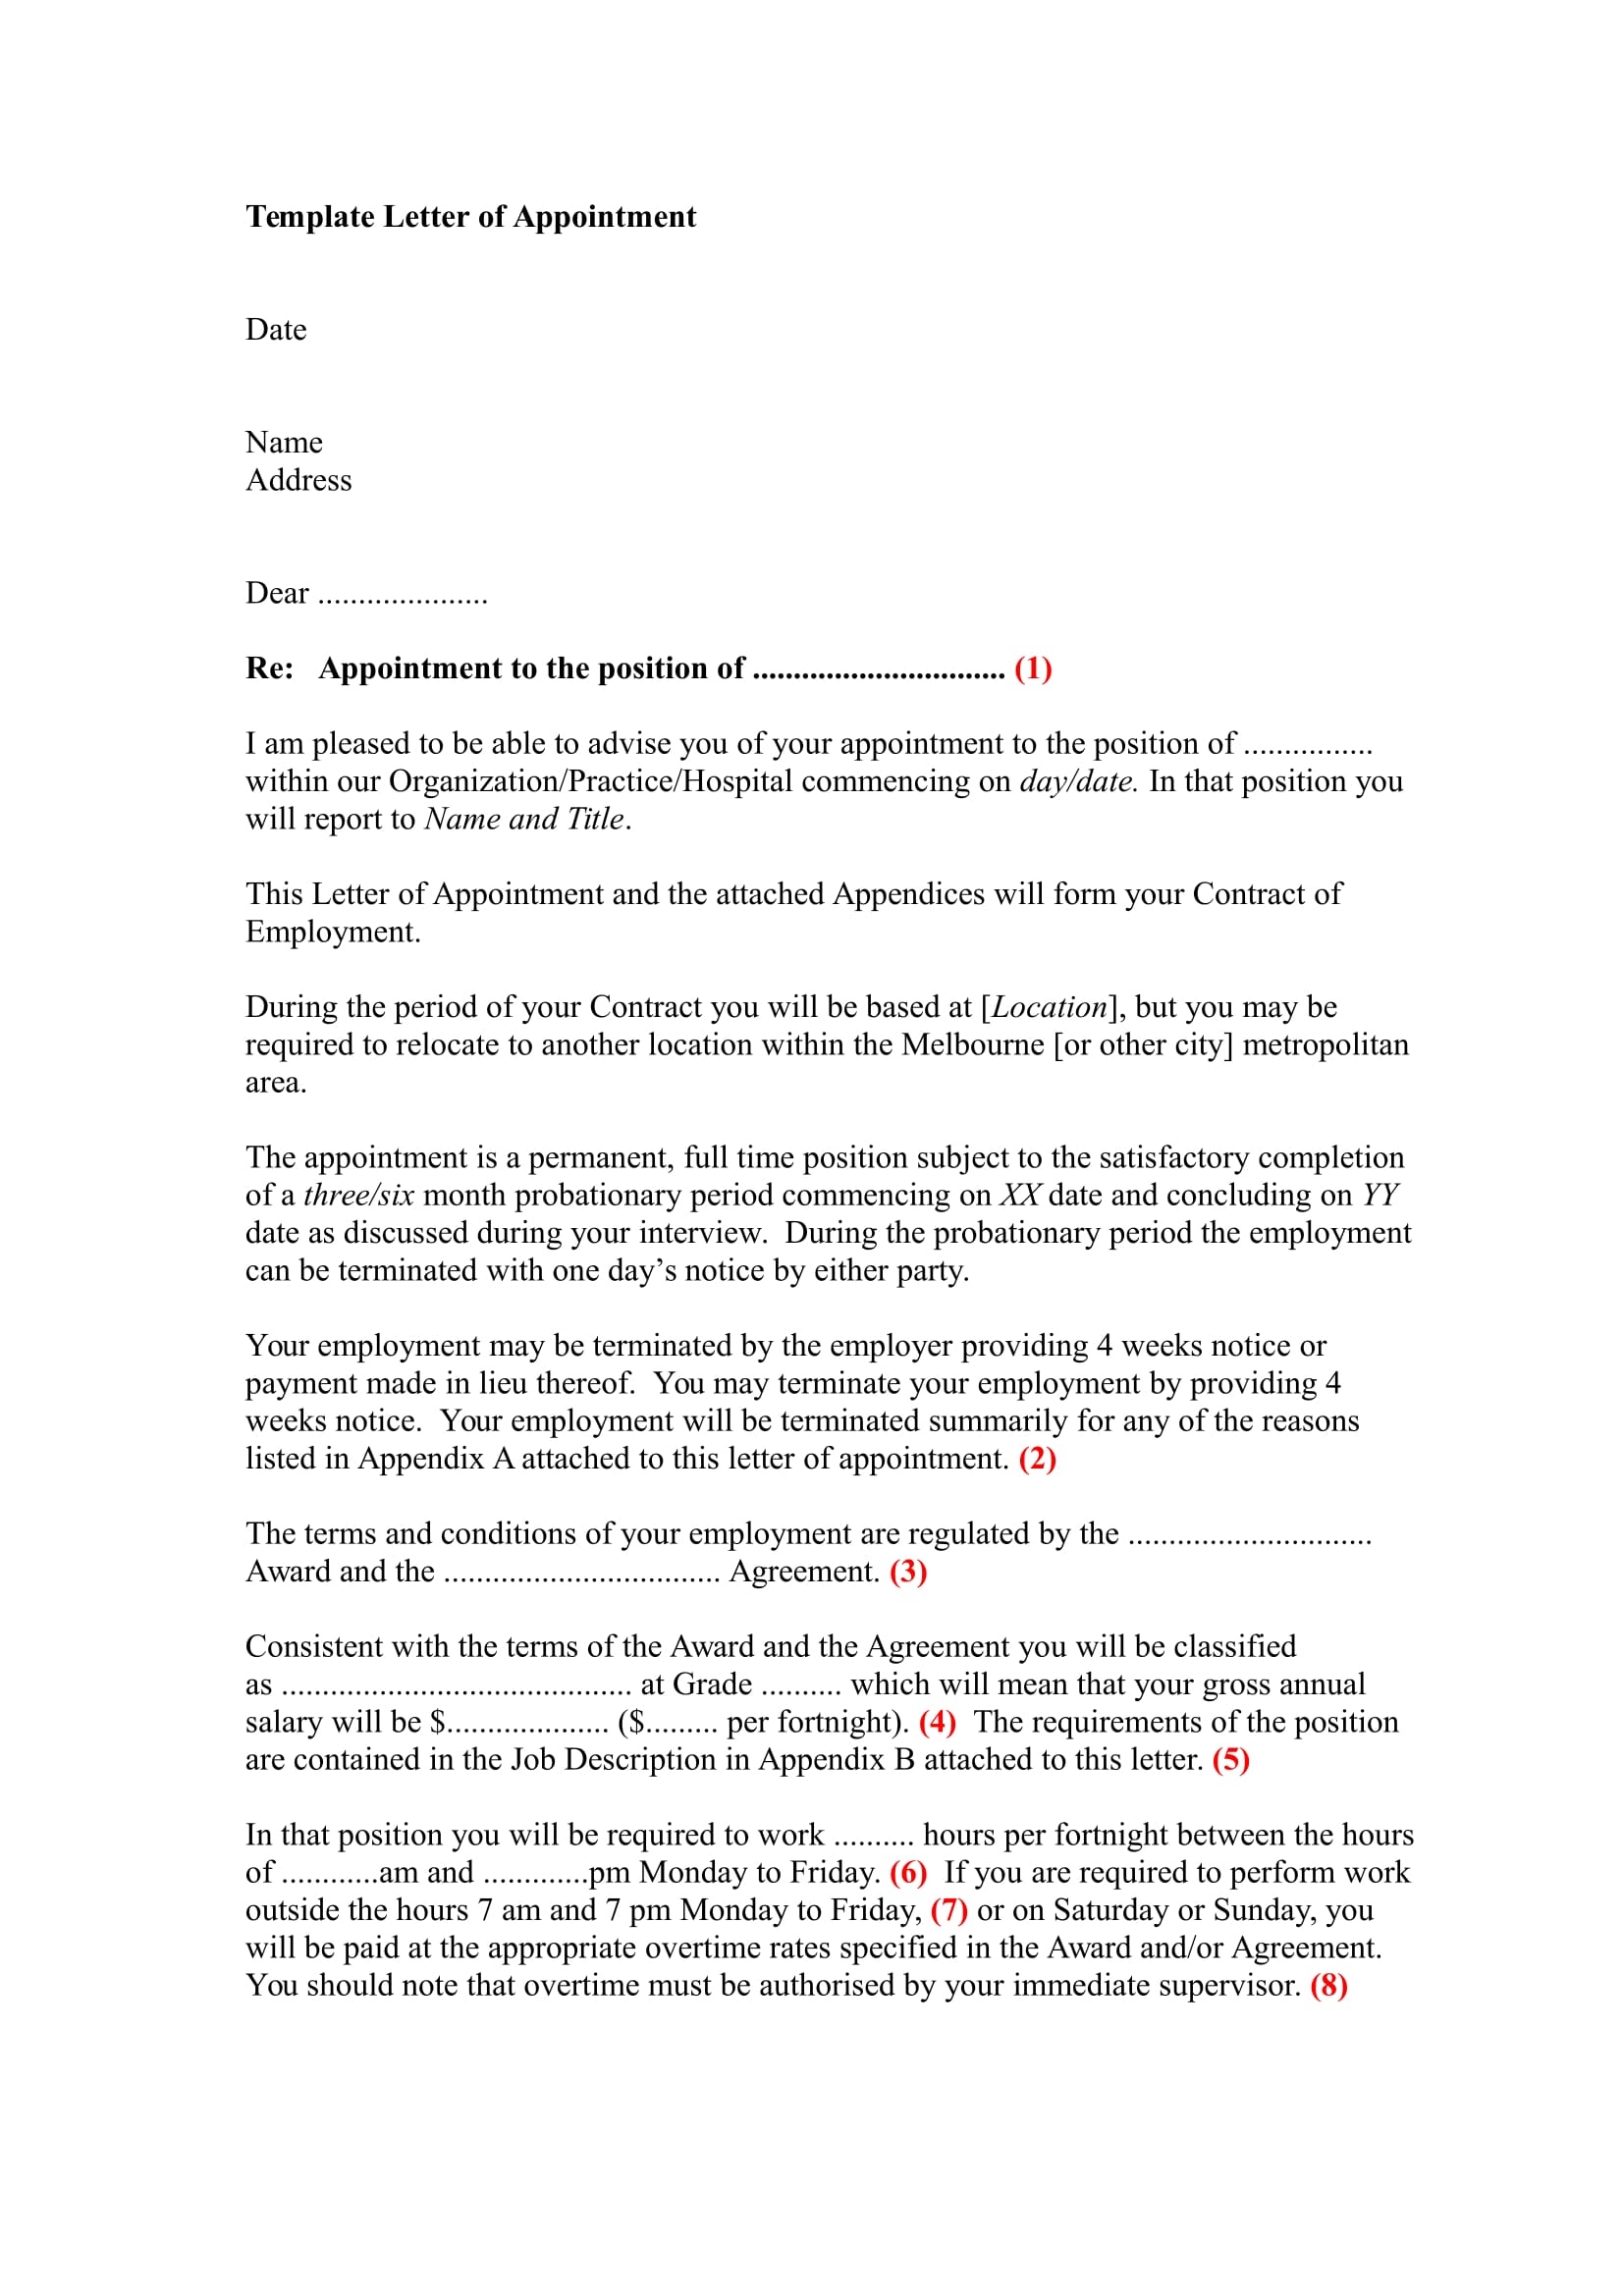 Terms And Conditions To Add In Appoinment Letter